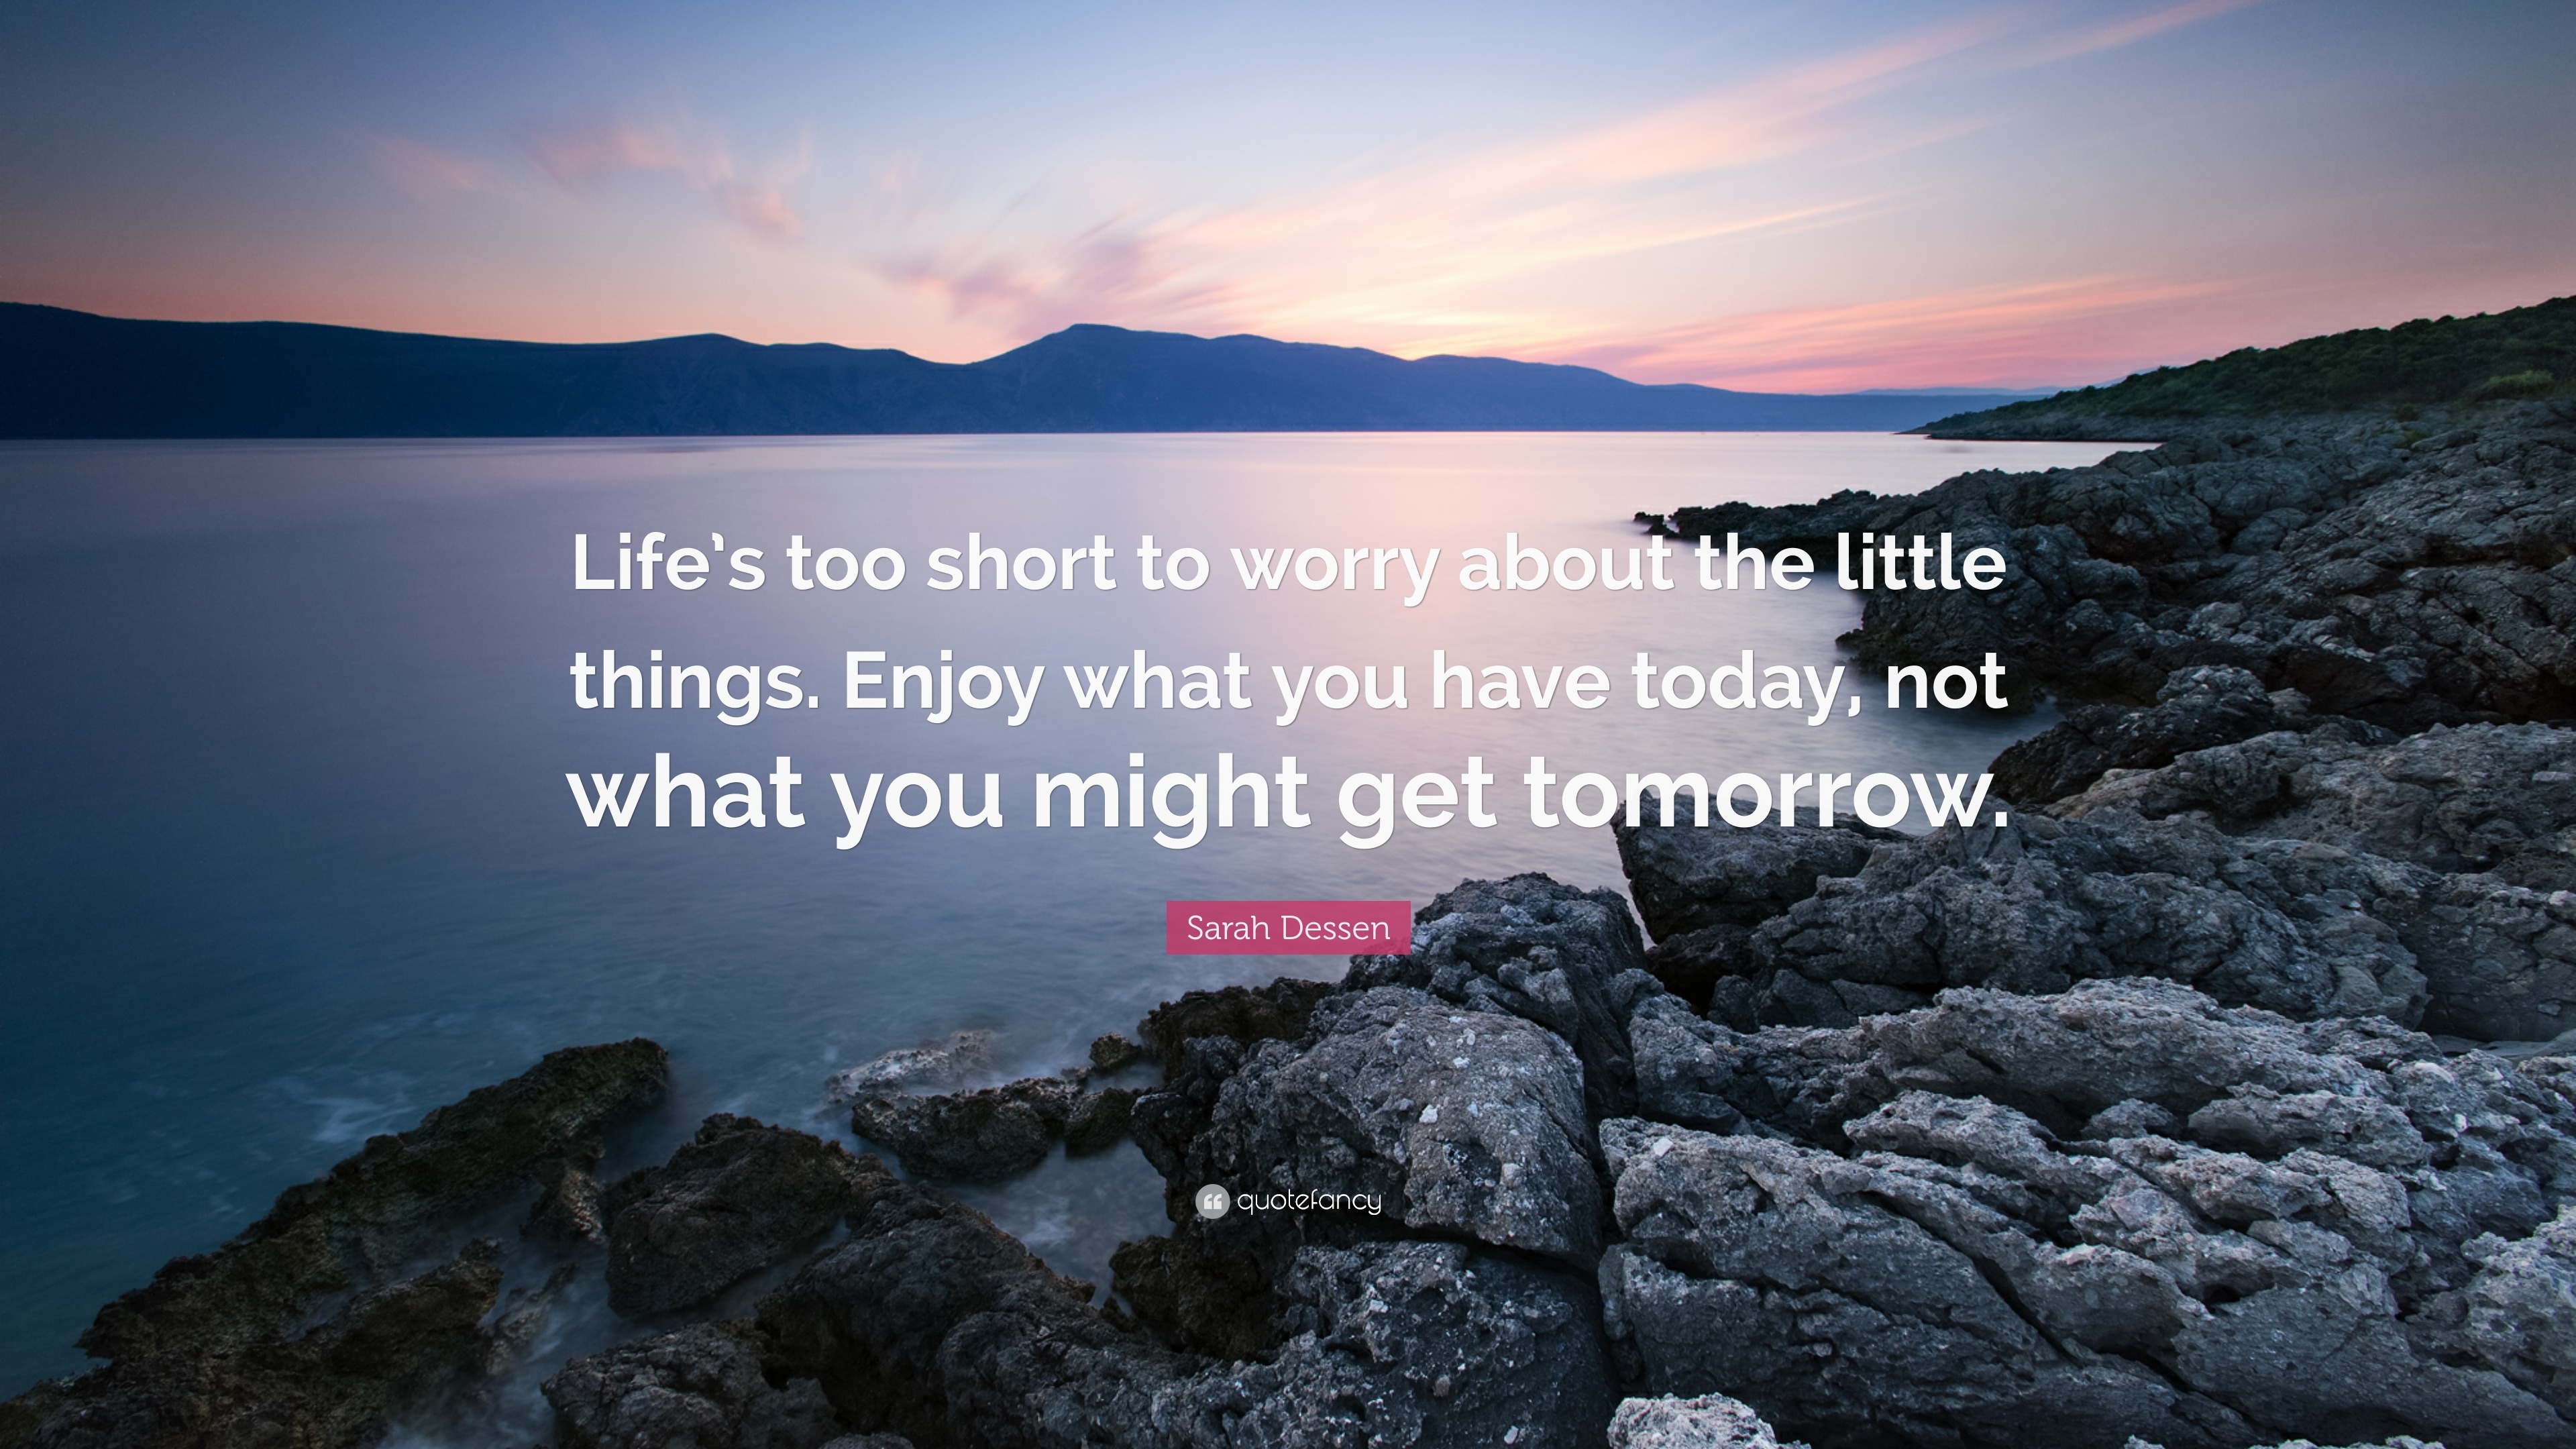 Sarah Dessen Quote “Life s too short to worry about the little things Enjoy